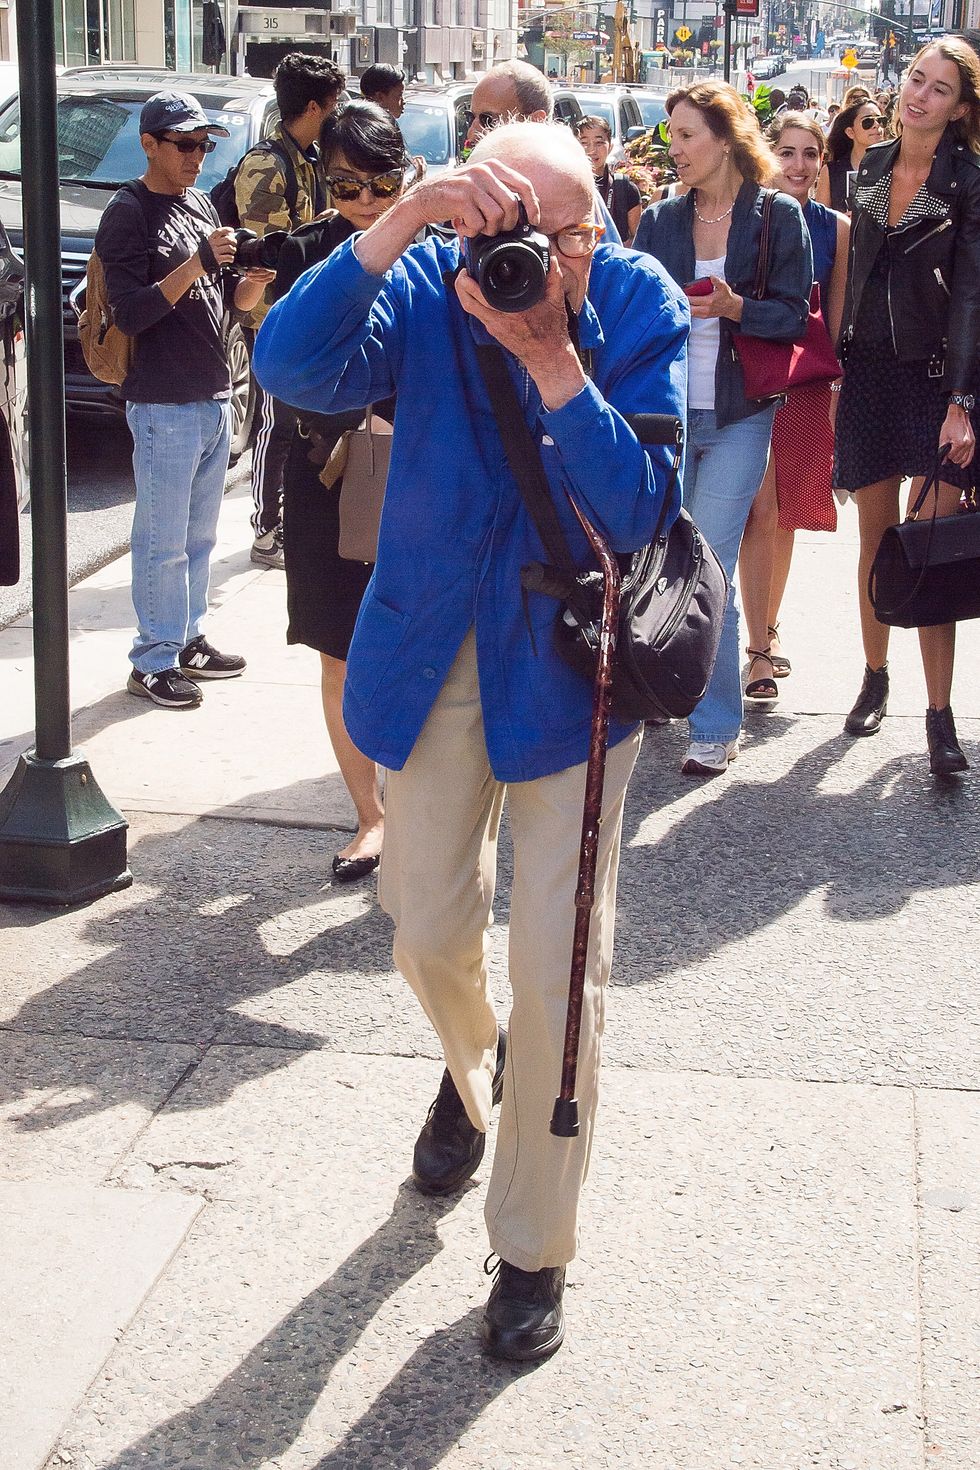 <p>In June, the fashion world mourned the loss of beloved photographer, Bill Cunningham. The 87-year-old icon died following a stroke, creating a noticeably empty space in the industry—namely on the street style scene, during Fashion Week and at New York's most prestigious events. To commemorate him, Cunningham's go-to street style corner—57th and 5th—was <a href="http://www.harpersbazaar.com/fashion/photography/news/a16376/bill-cunningham-57th-and-5th-avenue/" target="_blank" data-tracking-id="recirc-text-link">renamed "Bill Cunningham Corner"</a> in July and then during the first New York Fashion Week without him, photographers paid tribute to the legend <a href="http://www.harpersbazaar.com/fashion/fashion-week/news/a17579/fashion-photographers-bill-cunningham-tribute/" target="_blank" data-tracking-id="recirc-text-link">by all wearing his signature blue jacket</a>. </p>